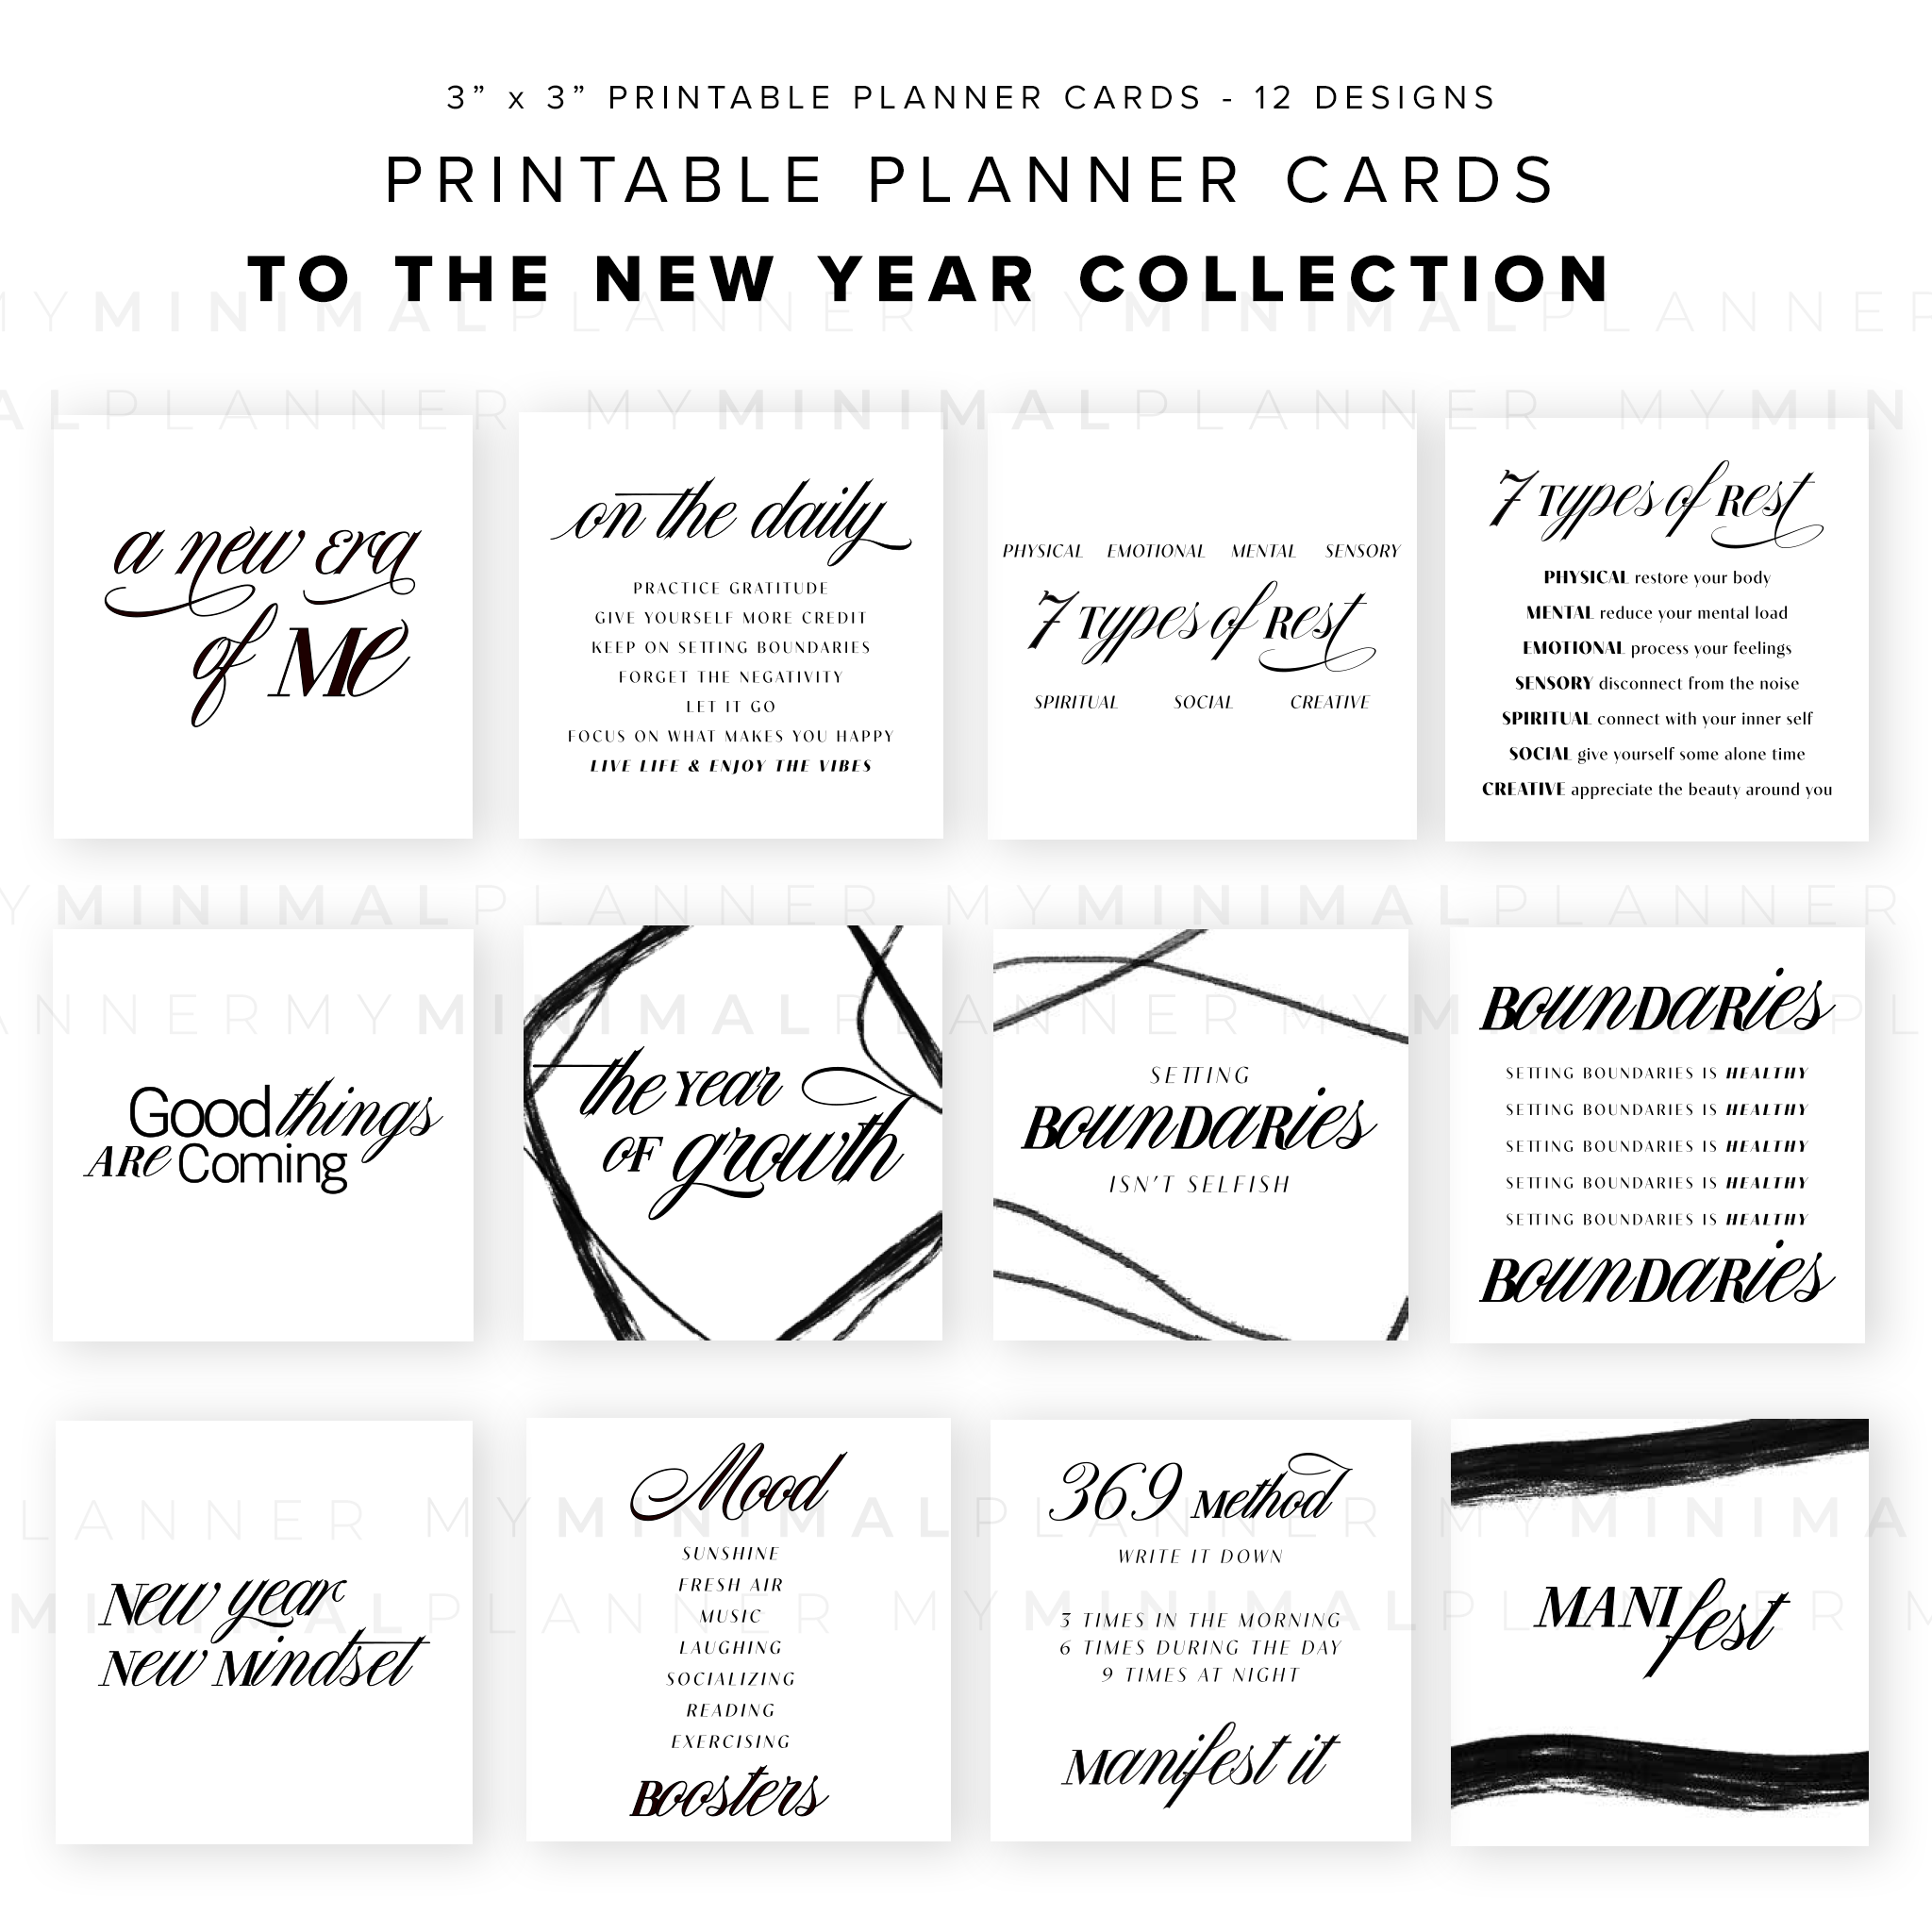 PPC25 - To the New Year - Printable Planner Cards